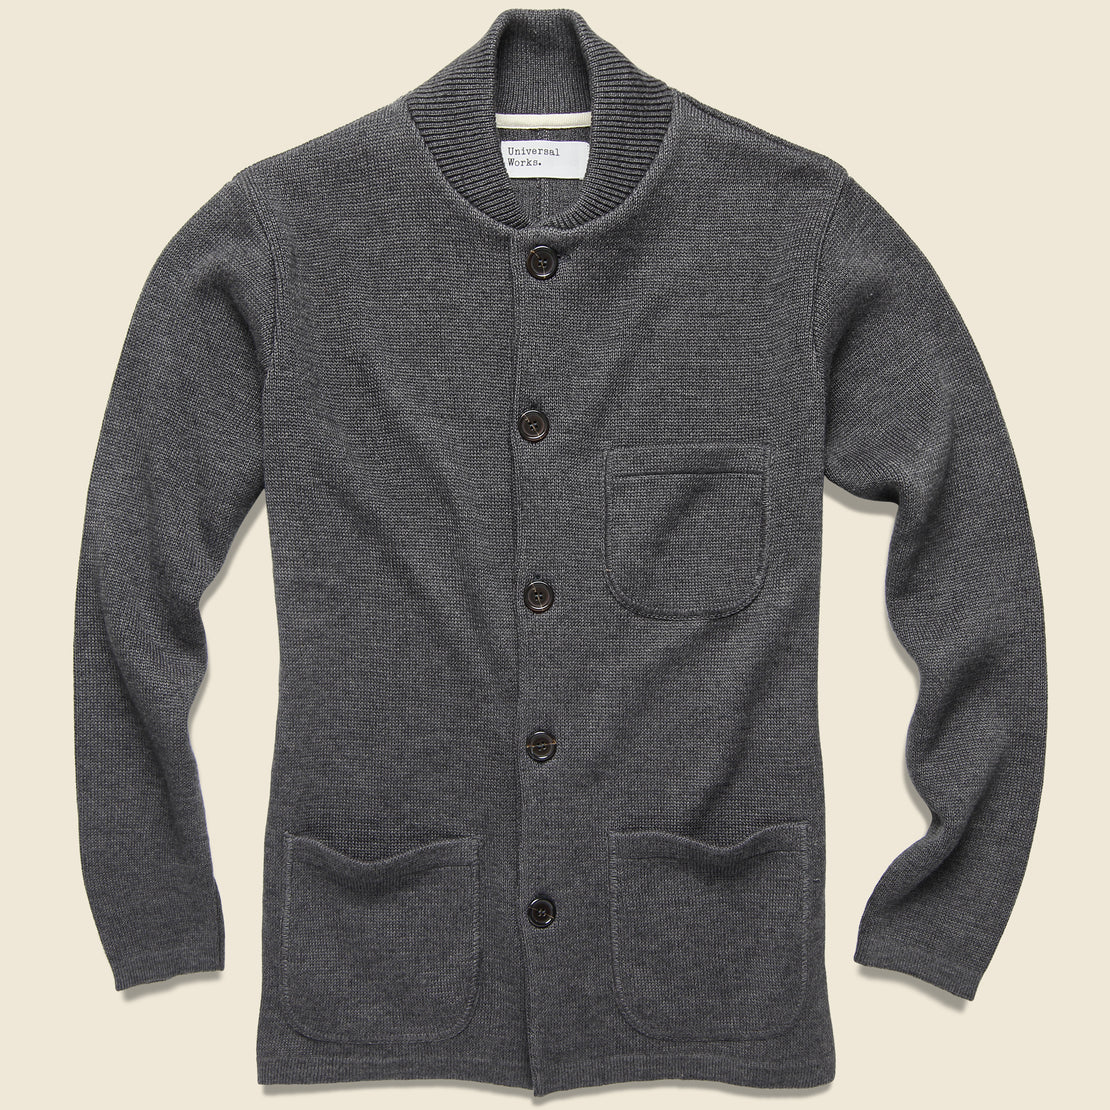 Universal Works Knit Work Jacket - Charcoal